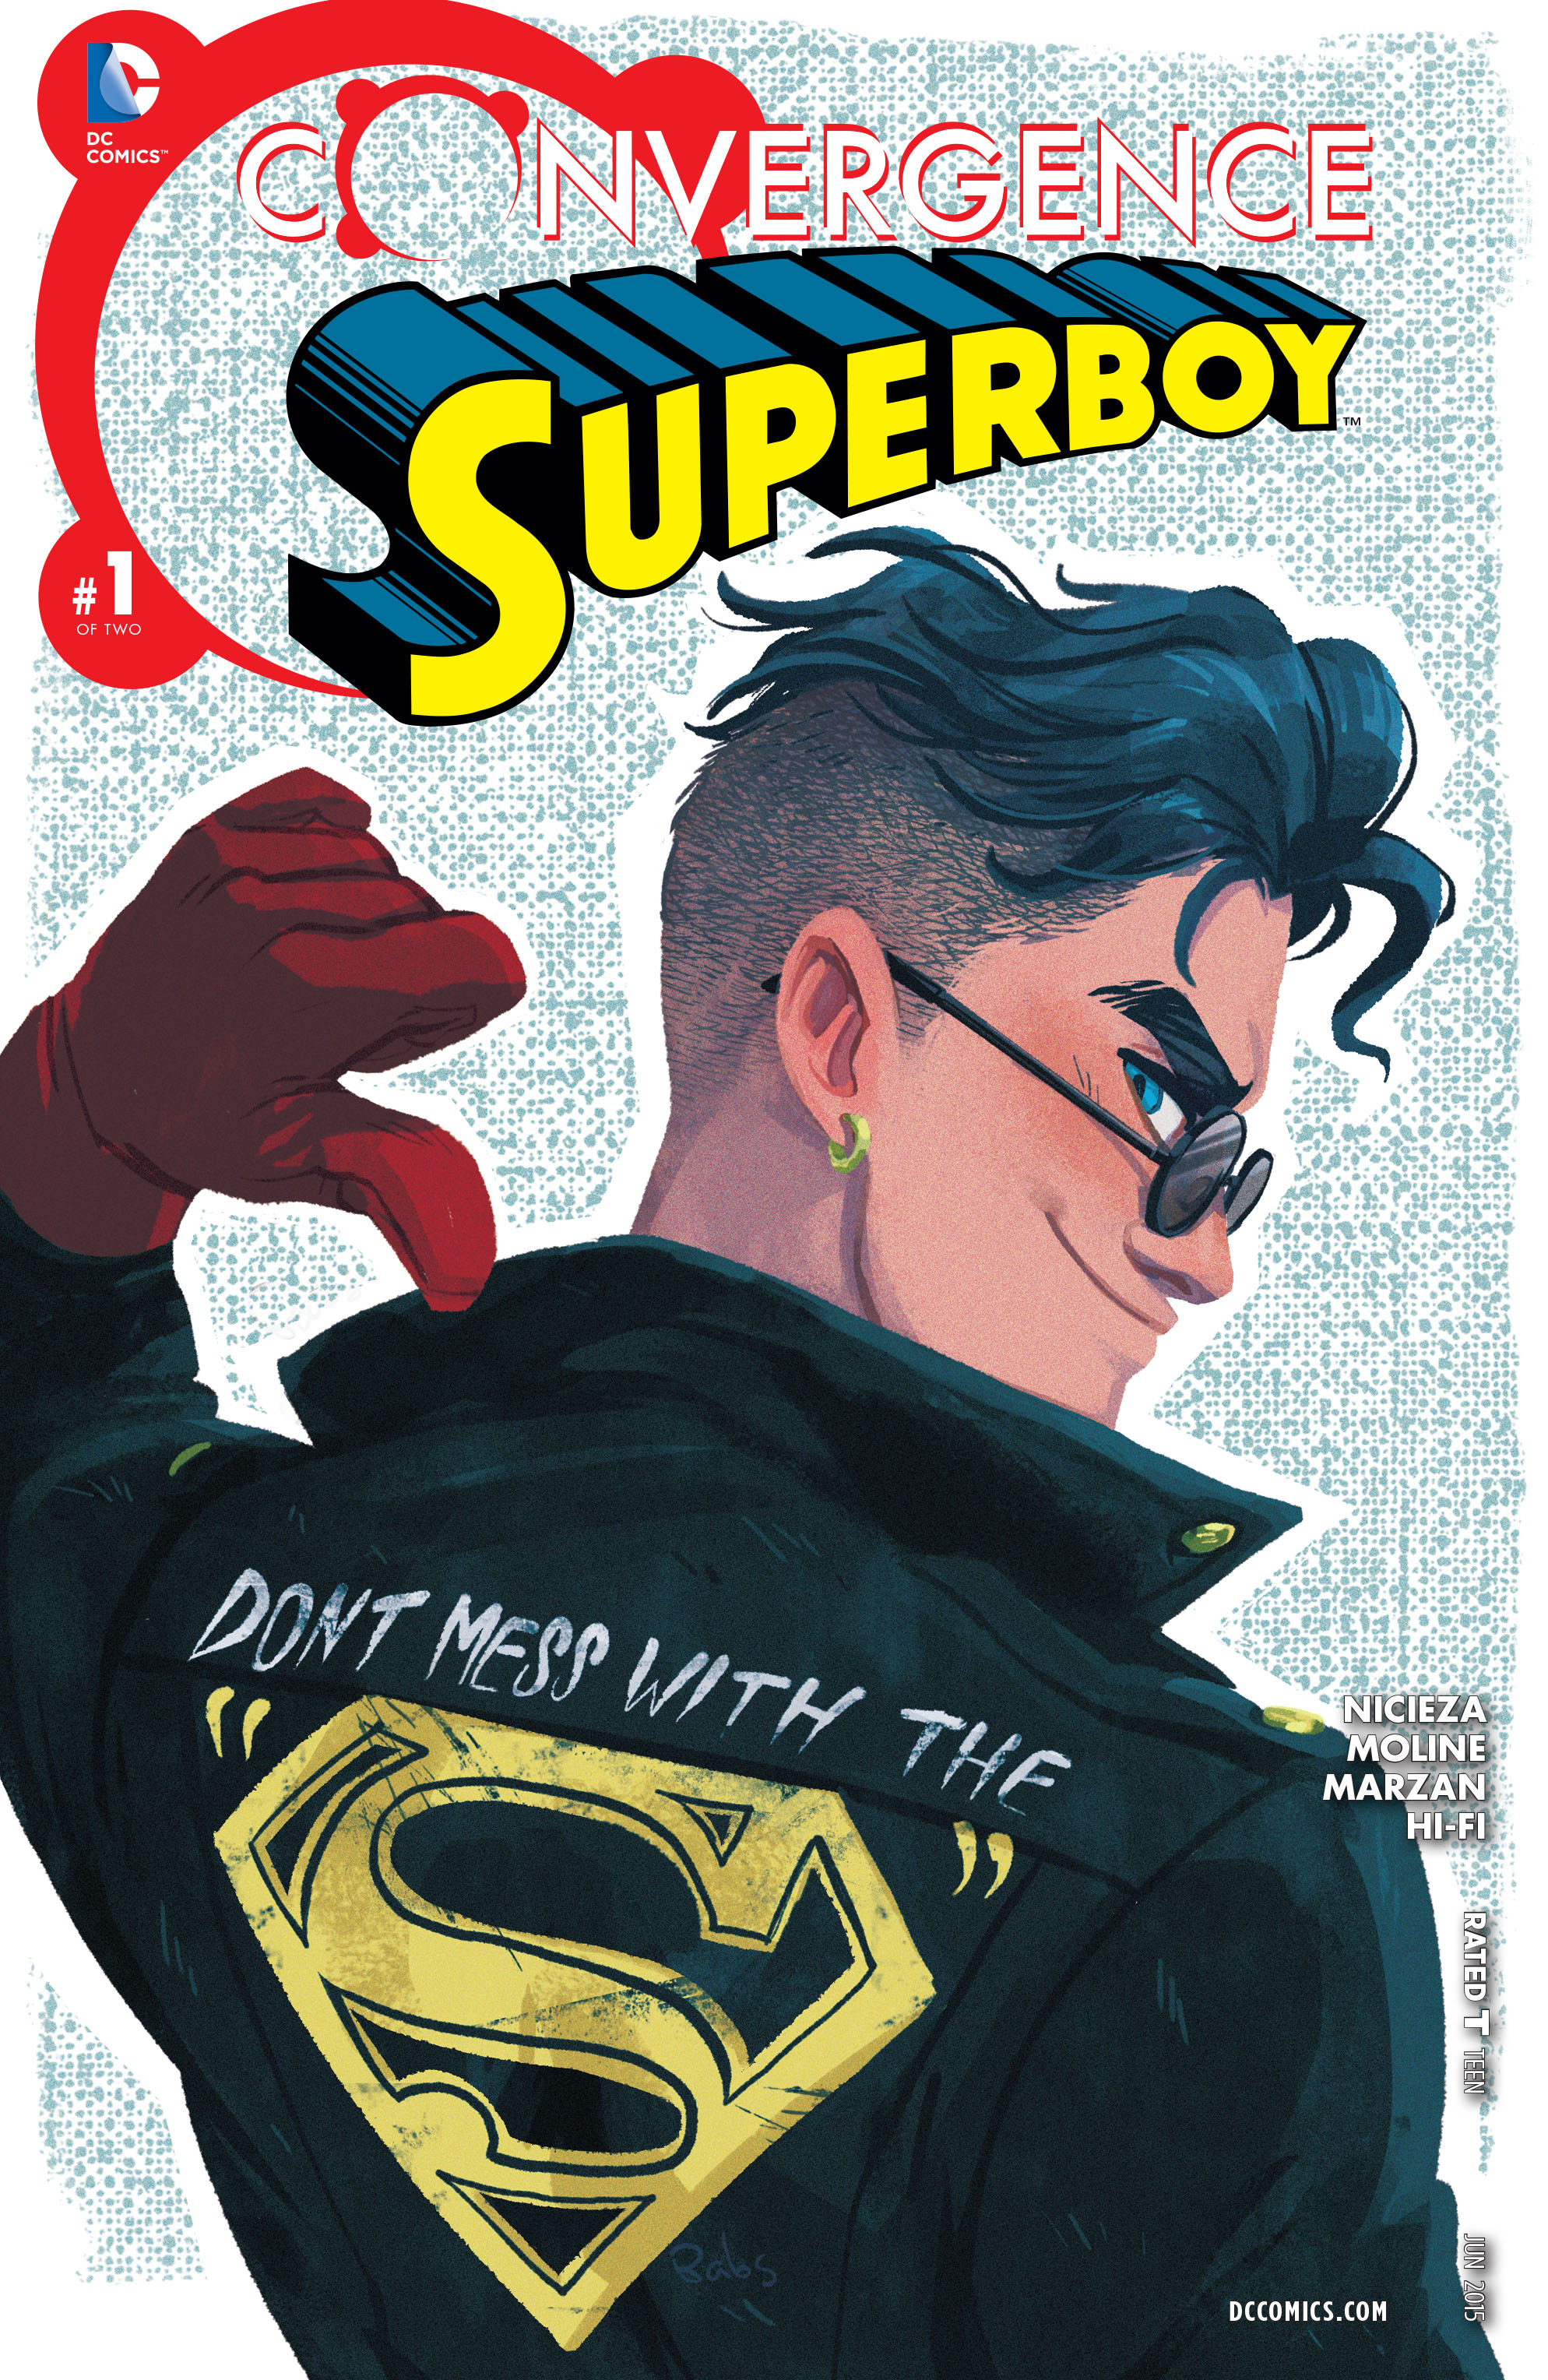 Read online Convergence Superboy comic -  Issue #1 - 1